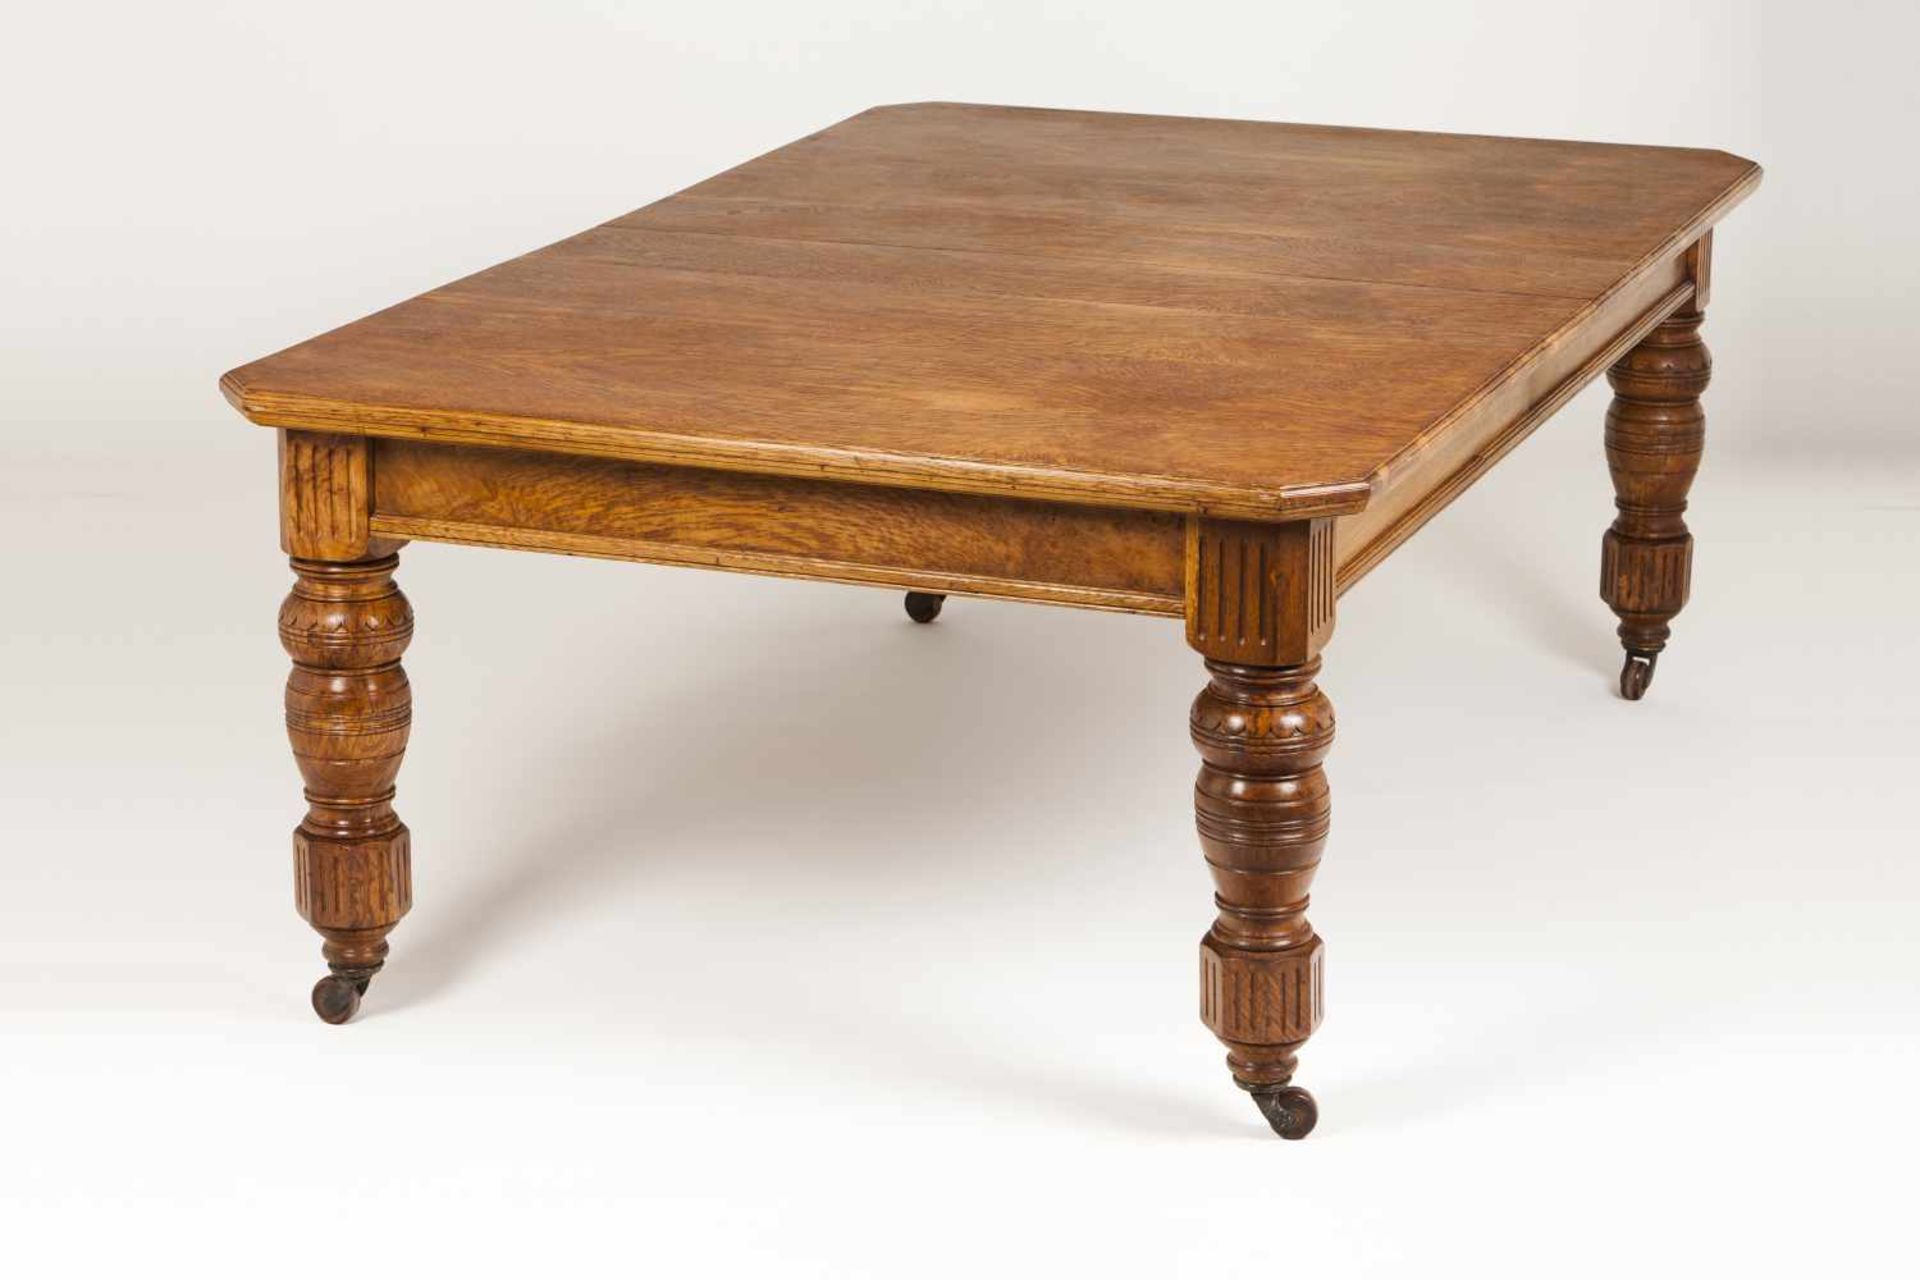 A Victorian style dining table